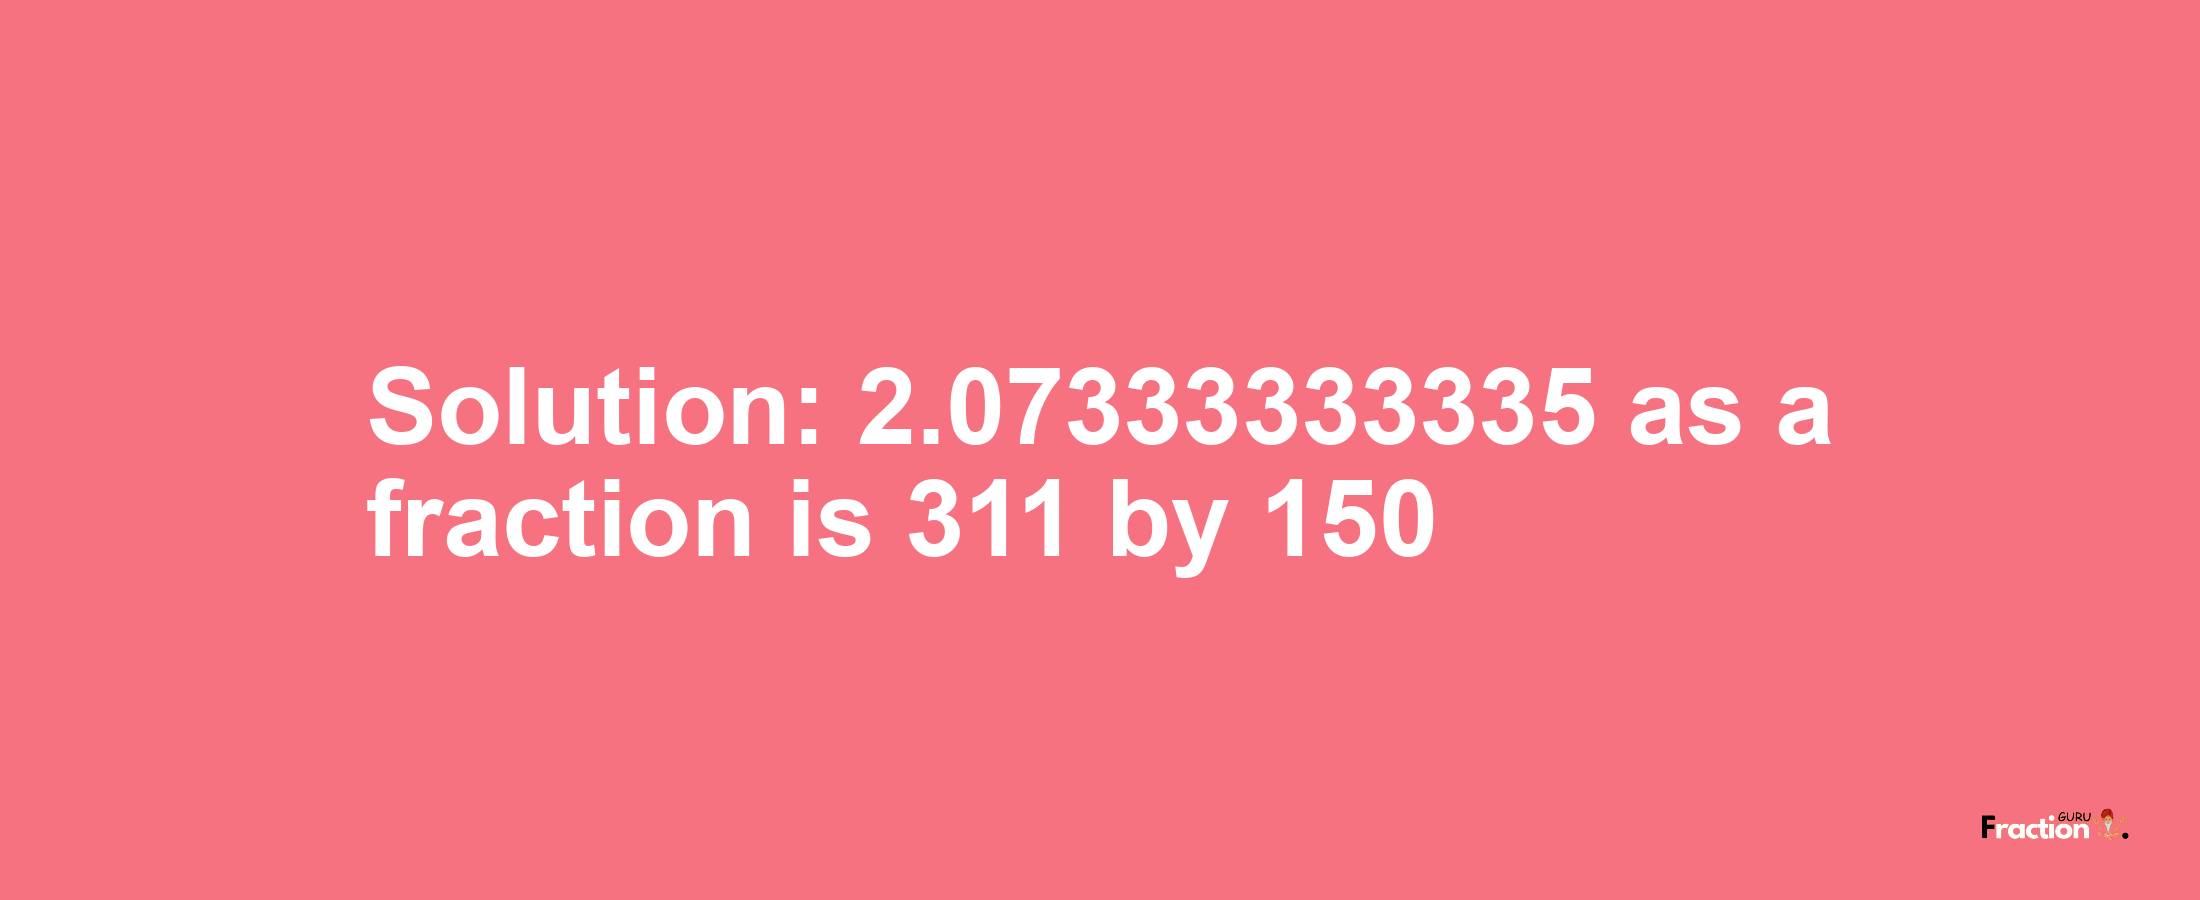 Solution:2.07333333335 as a fraction is 311/150